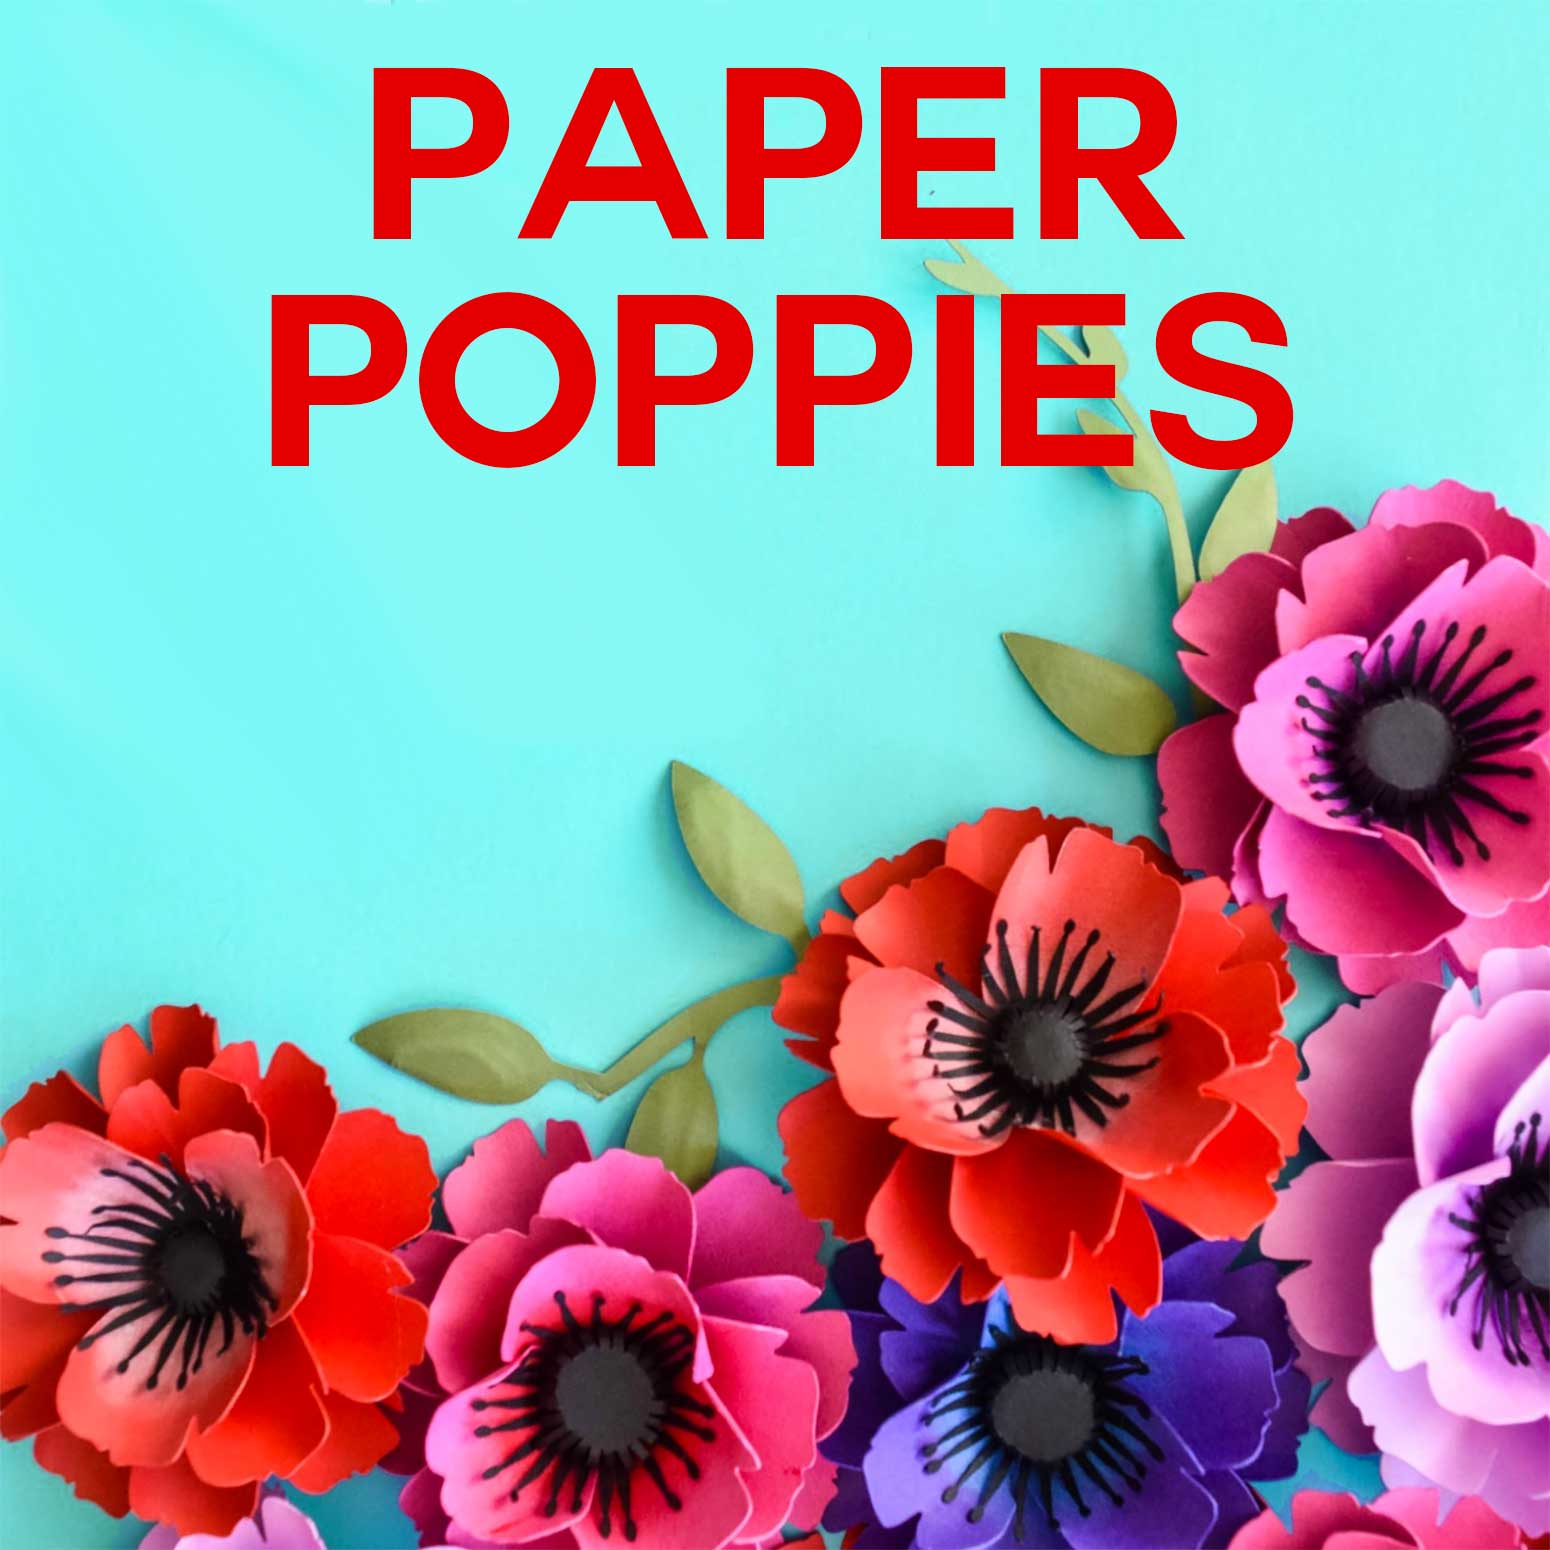 Make Paper Poppies with this free template in SVG and PDF - a fun papercraft project for Memorial Day, Veterans Day, and Remberance Day #svgcutfile #cricut #paperflowers #veteransday